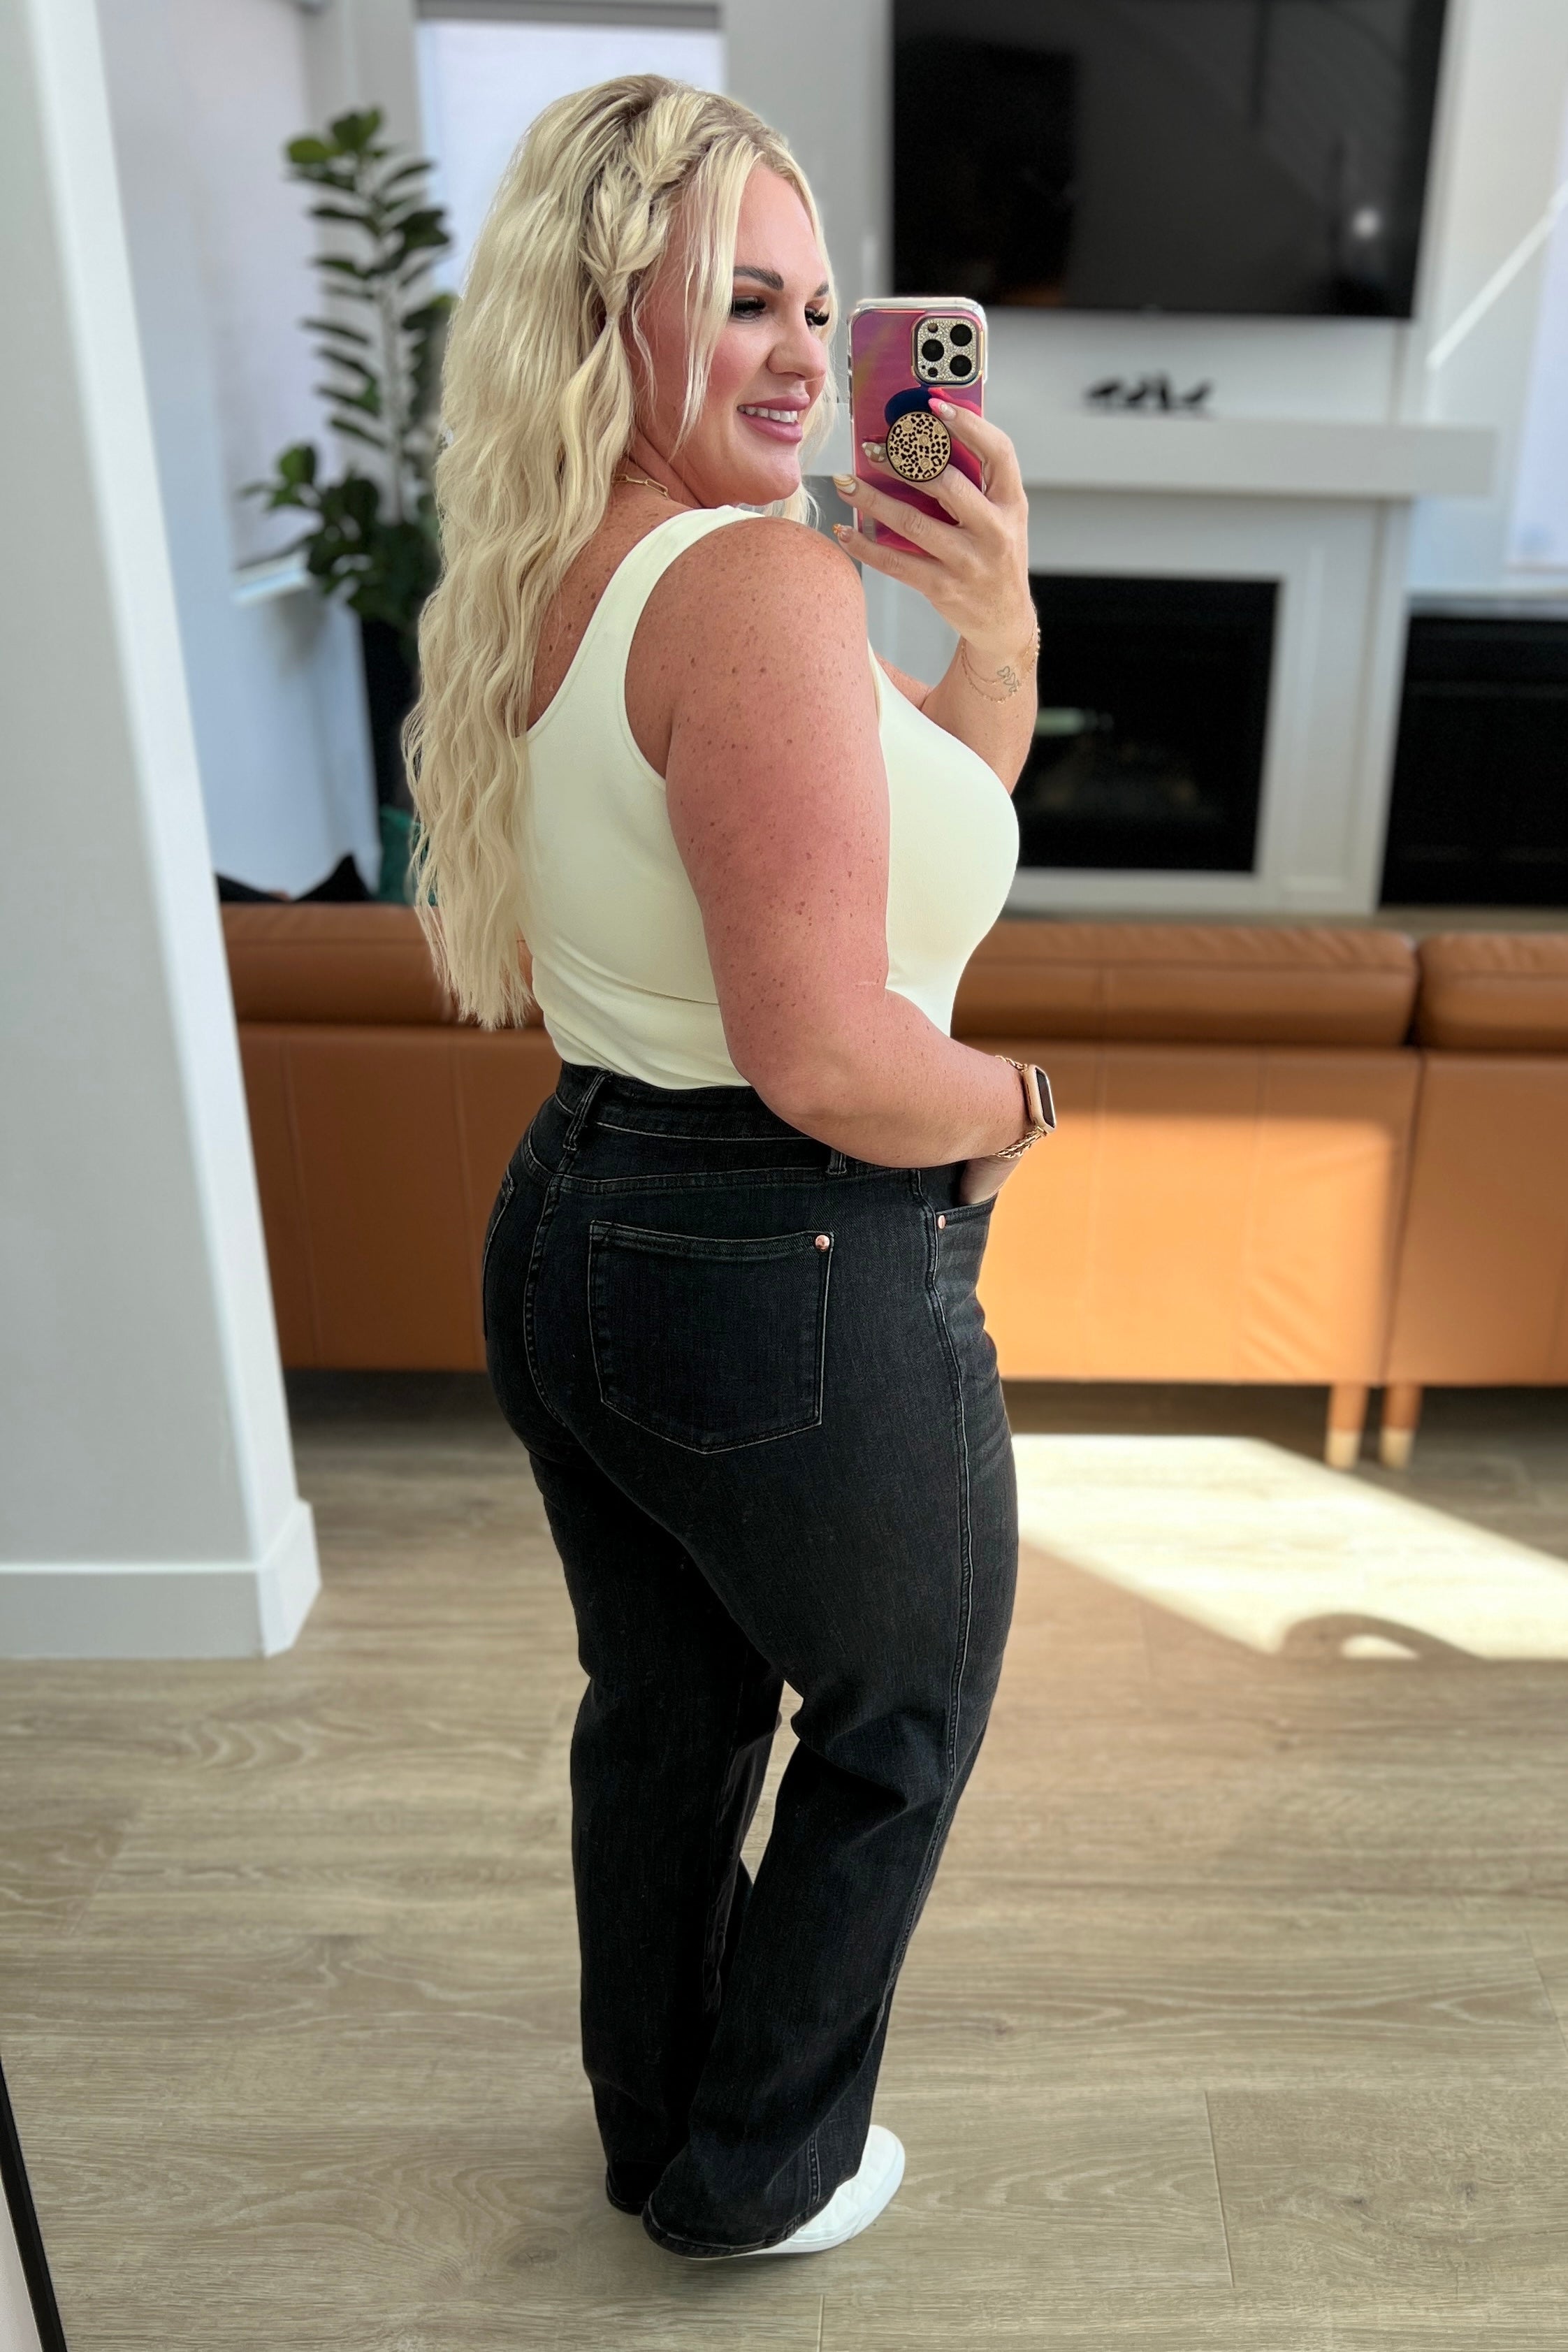 Joan High Rise Control Top Straight Jeans in Washed Black-Jeans-Krush Kandy, Women's Online Fashion Boutique Located in Phoenix, Arizona (Scottsdale Area)